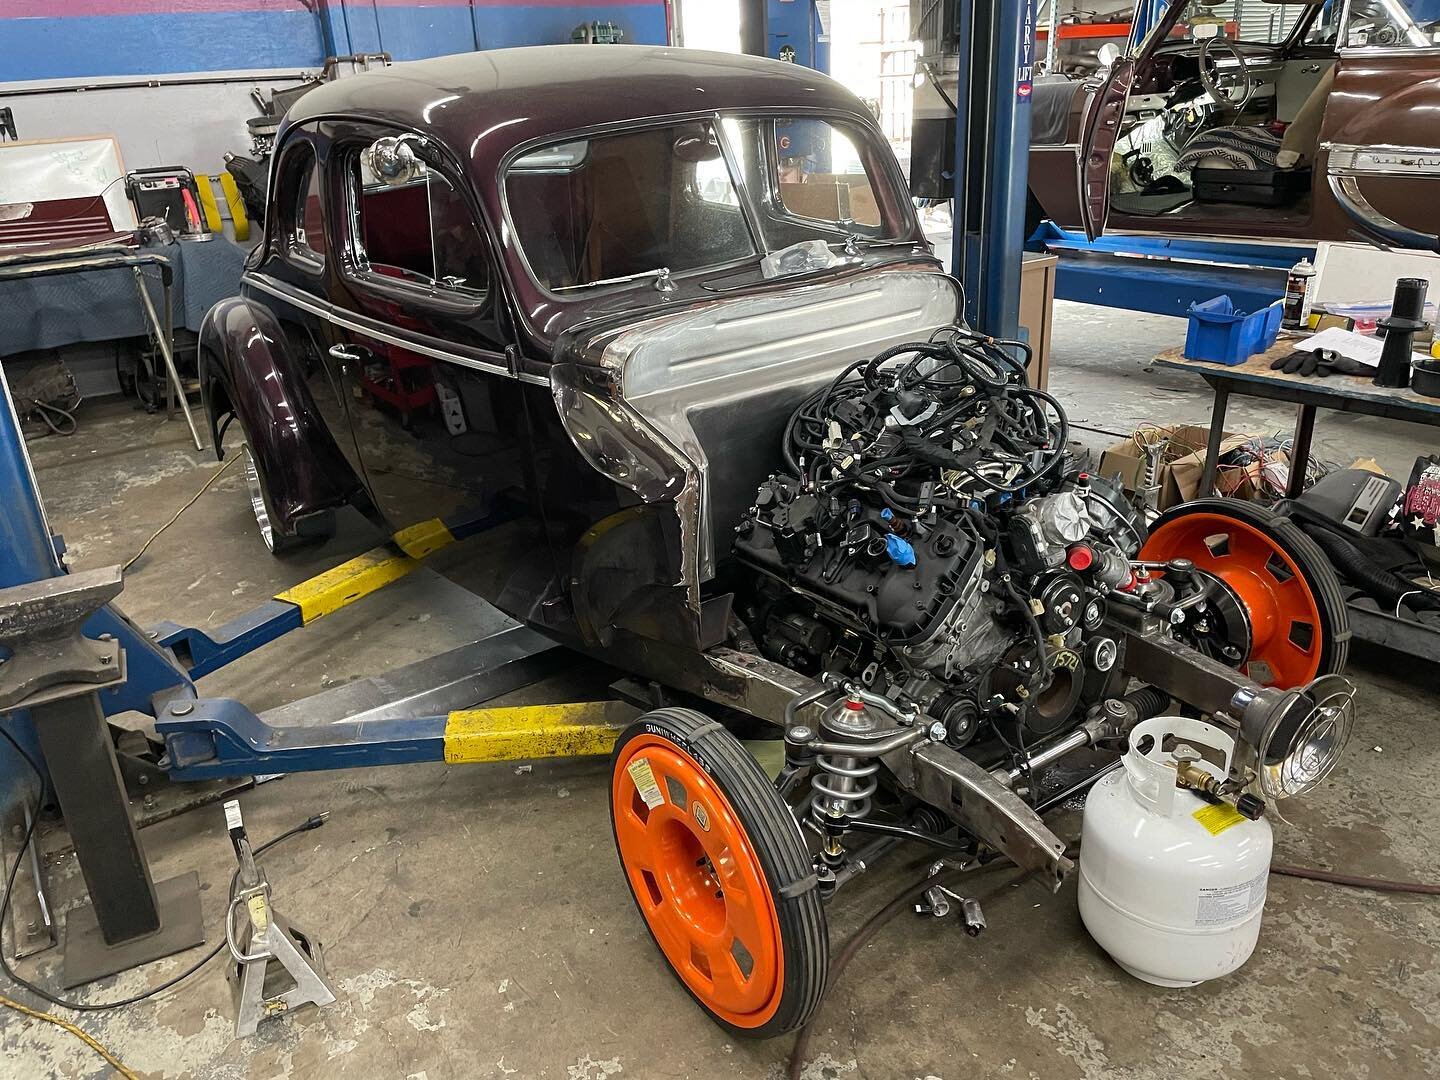 One of our current builds, &lsquo;40 Ford that was in a fire, modernizing it through the rebuild process with a new gen3 coyote, mustang II from @heidtssuspensions @vintageair_ @american.autowire @guniwheel @directsheetmetal